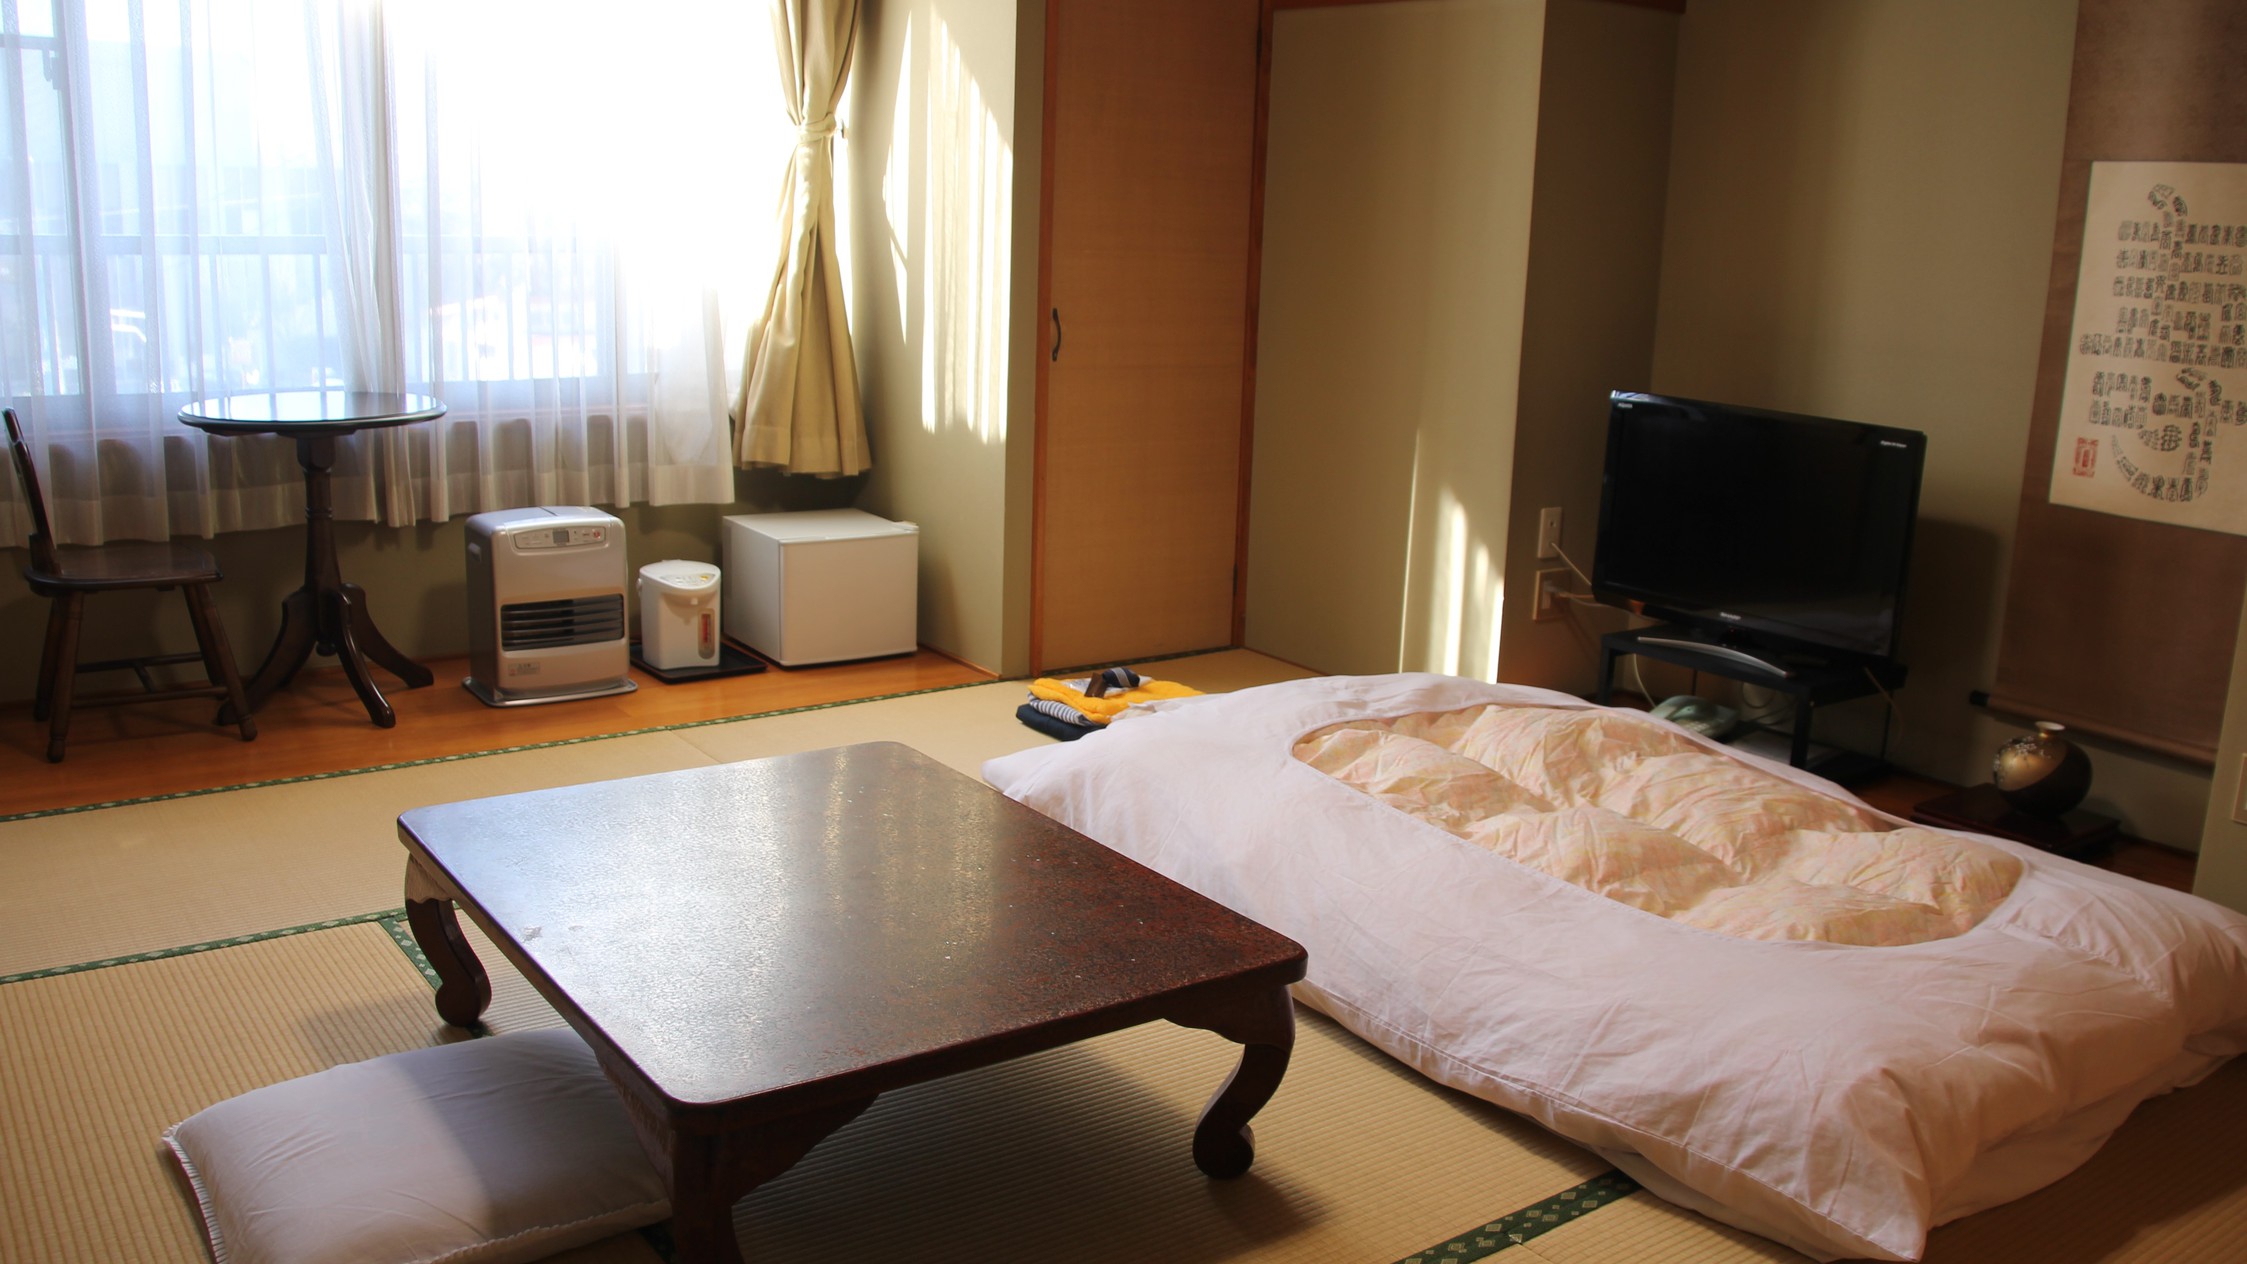 Nagasaka Kanko Hotel Nagasaka Kanko Hotel is conveniently located in the popular Hokuto area. Featuring a satisfying list of amenities, guests will find their stay at the property a comfortable one. Free Wi-Fi in all room